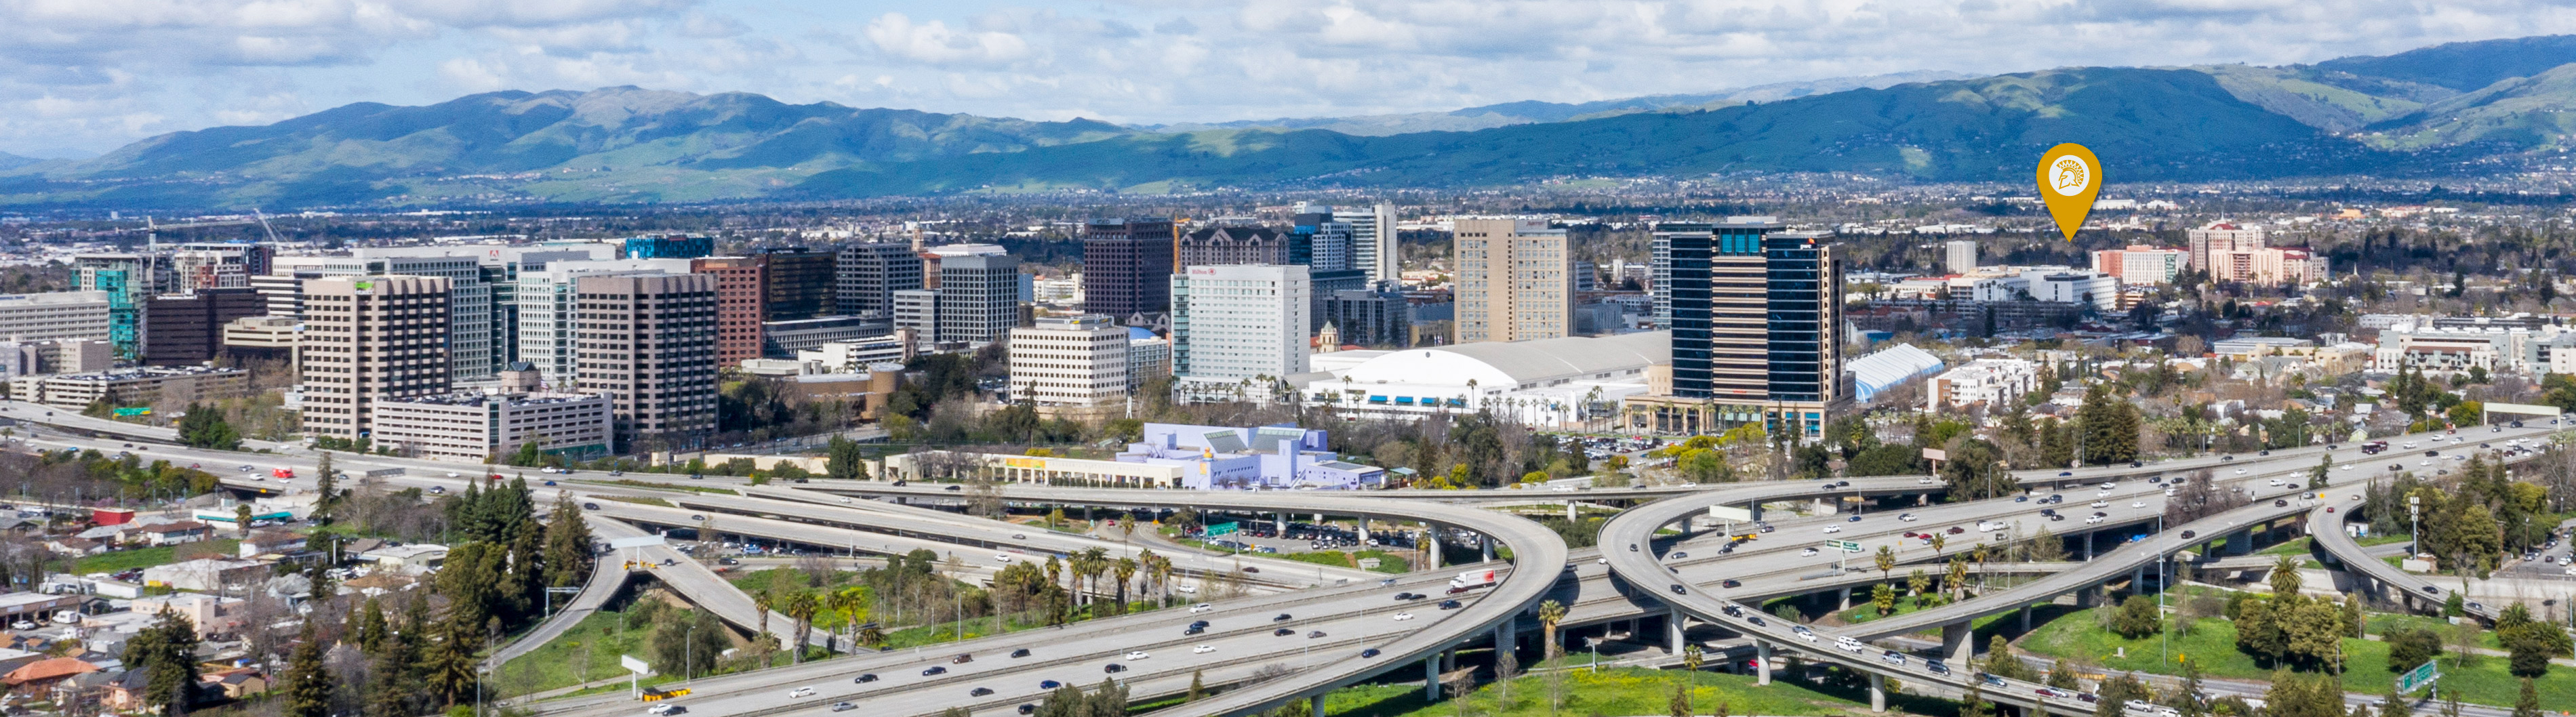 View of San Jose, Northern California's largest city.